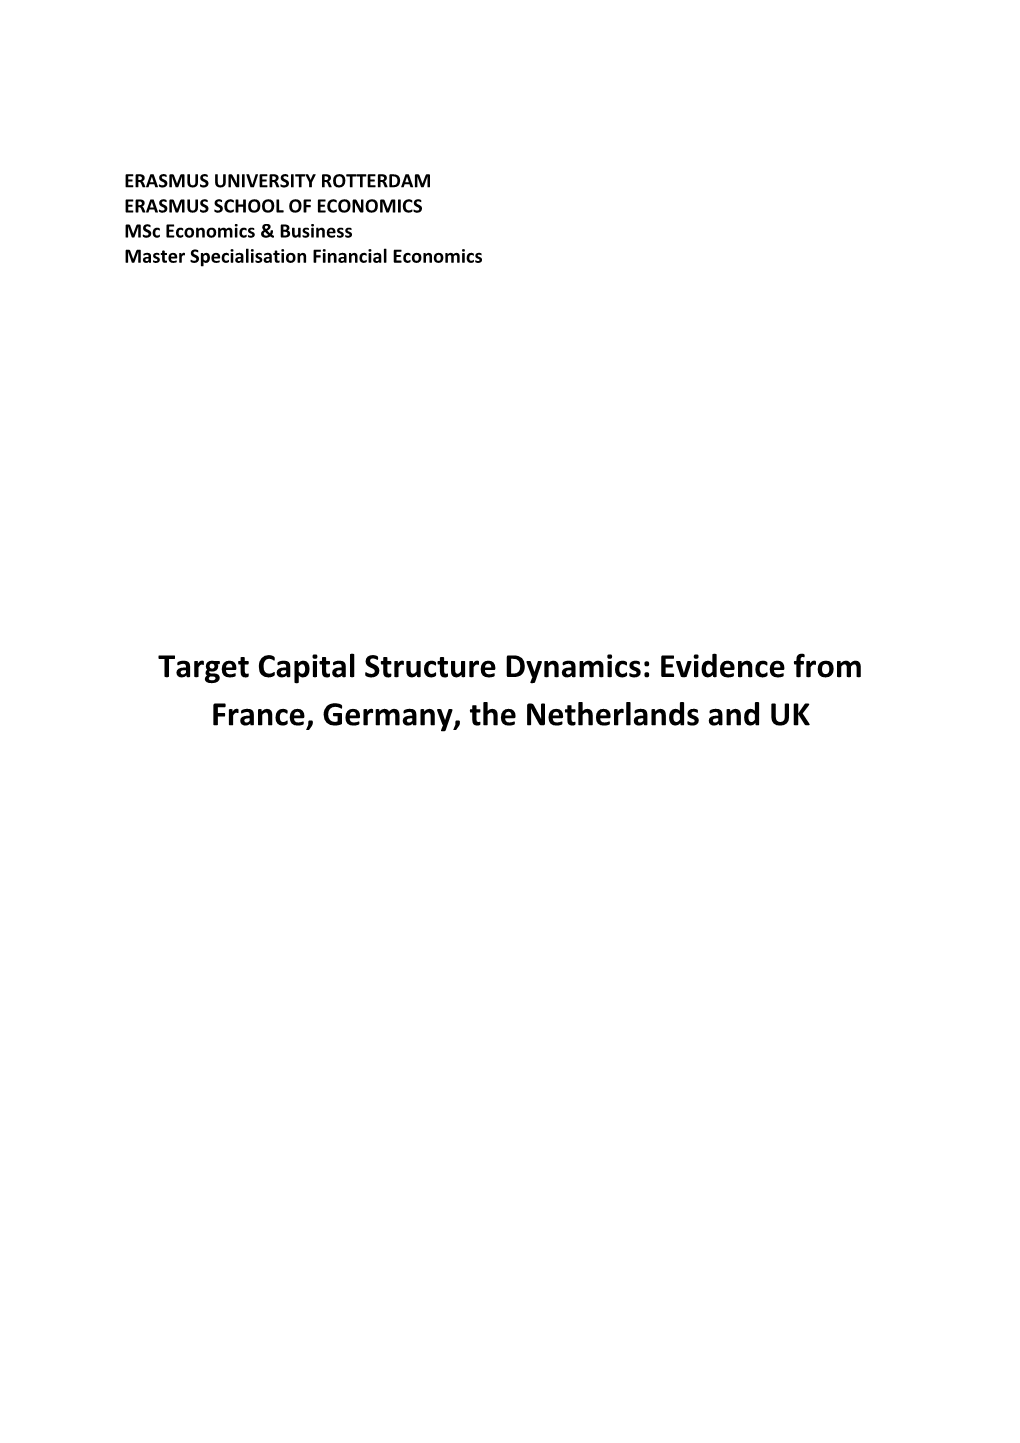 Target Capital Structure Dynamics: Evidence from France, Germany, the Netherlands and UK